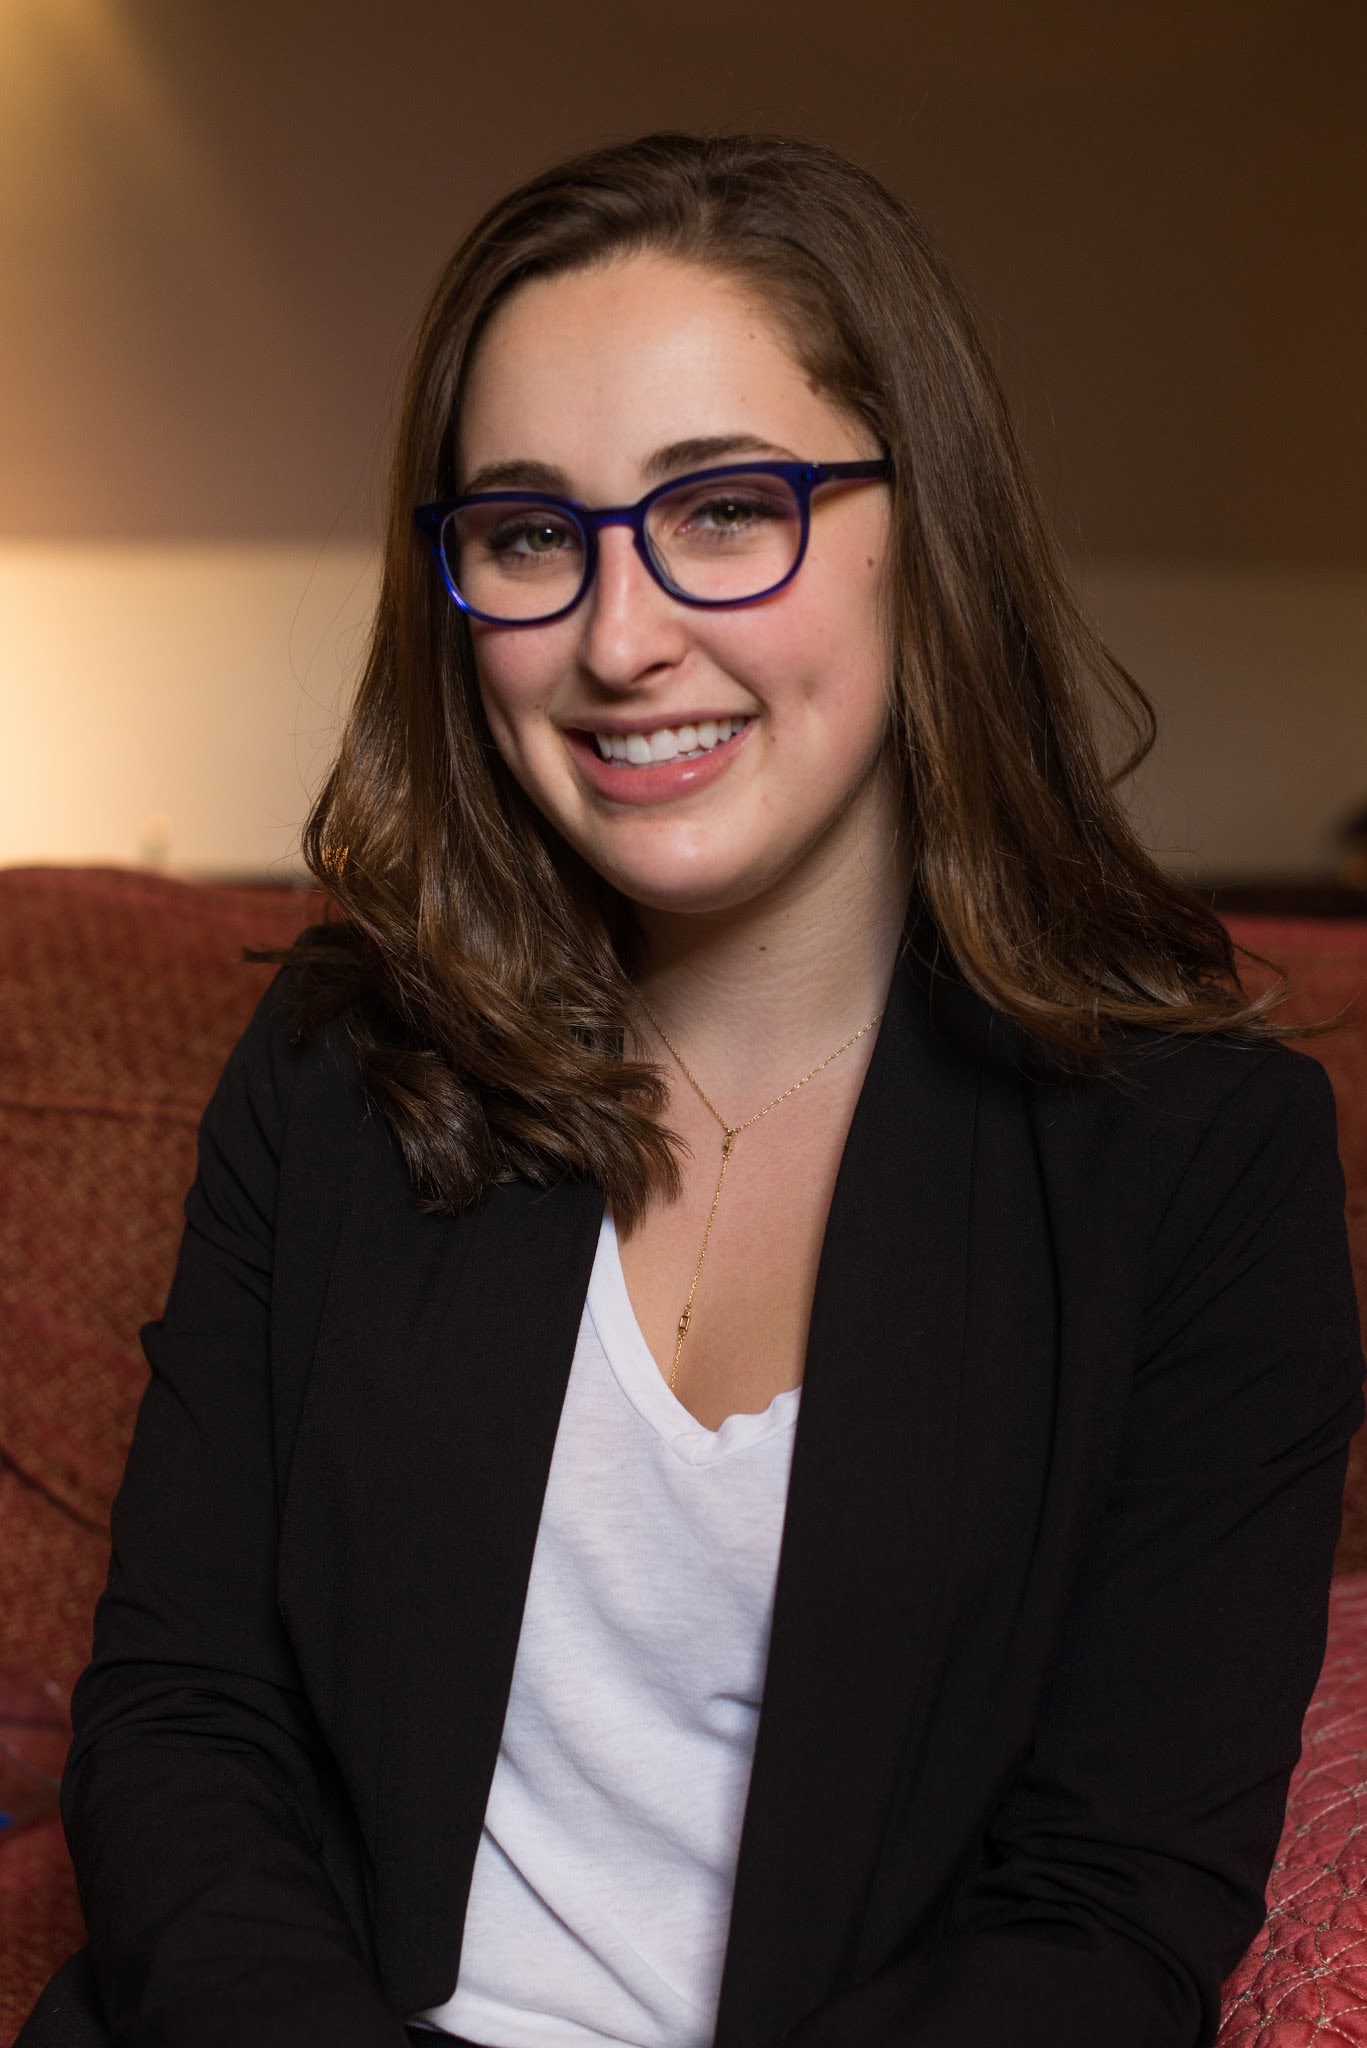 Alana Steinberg '18, Consulting Project Manager